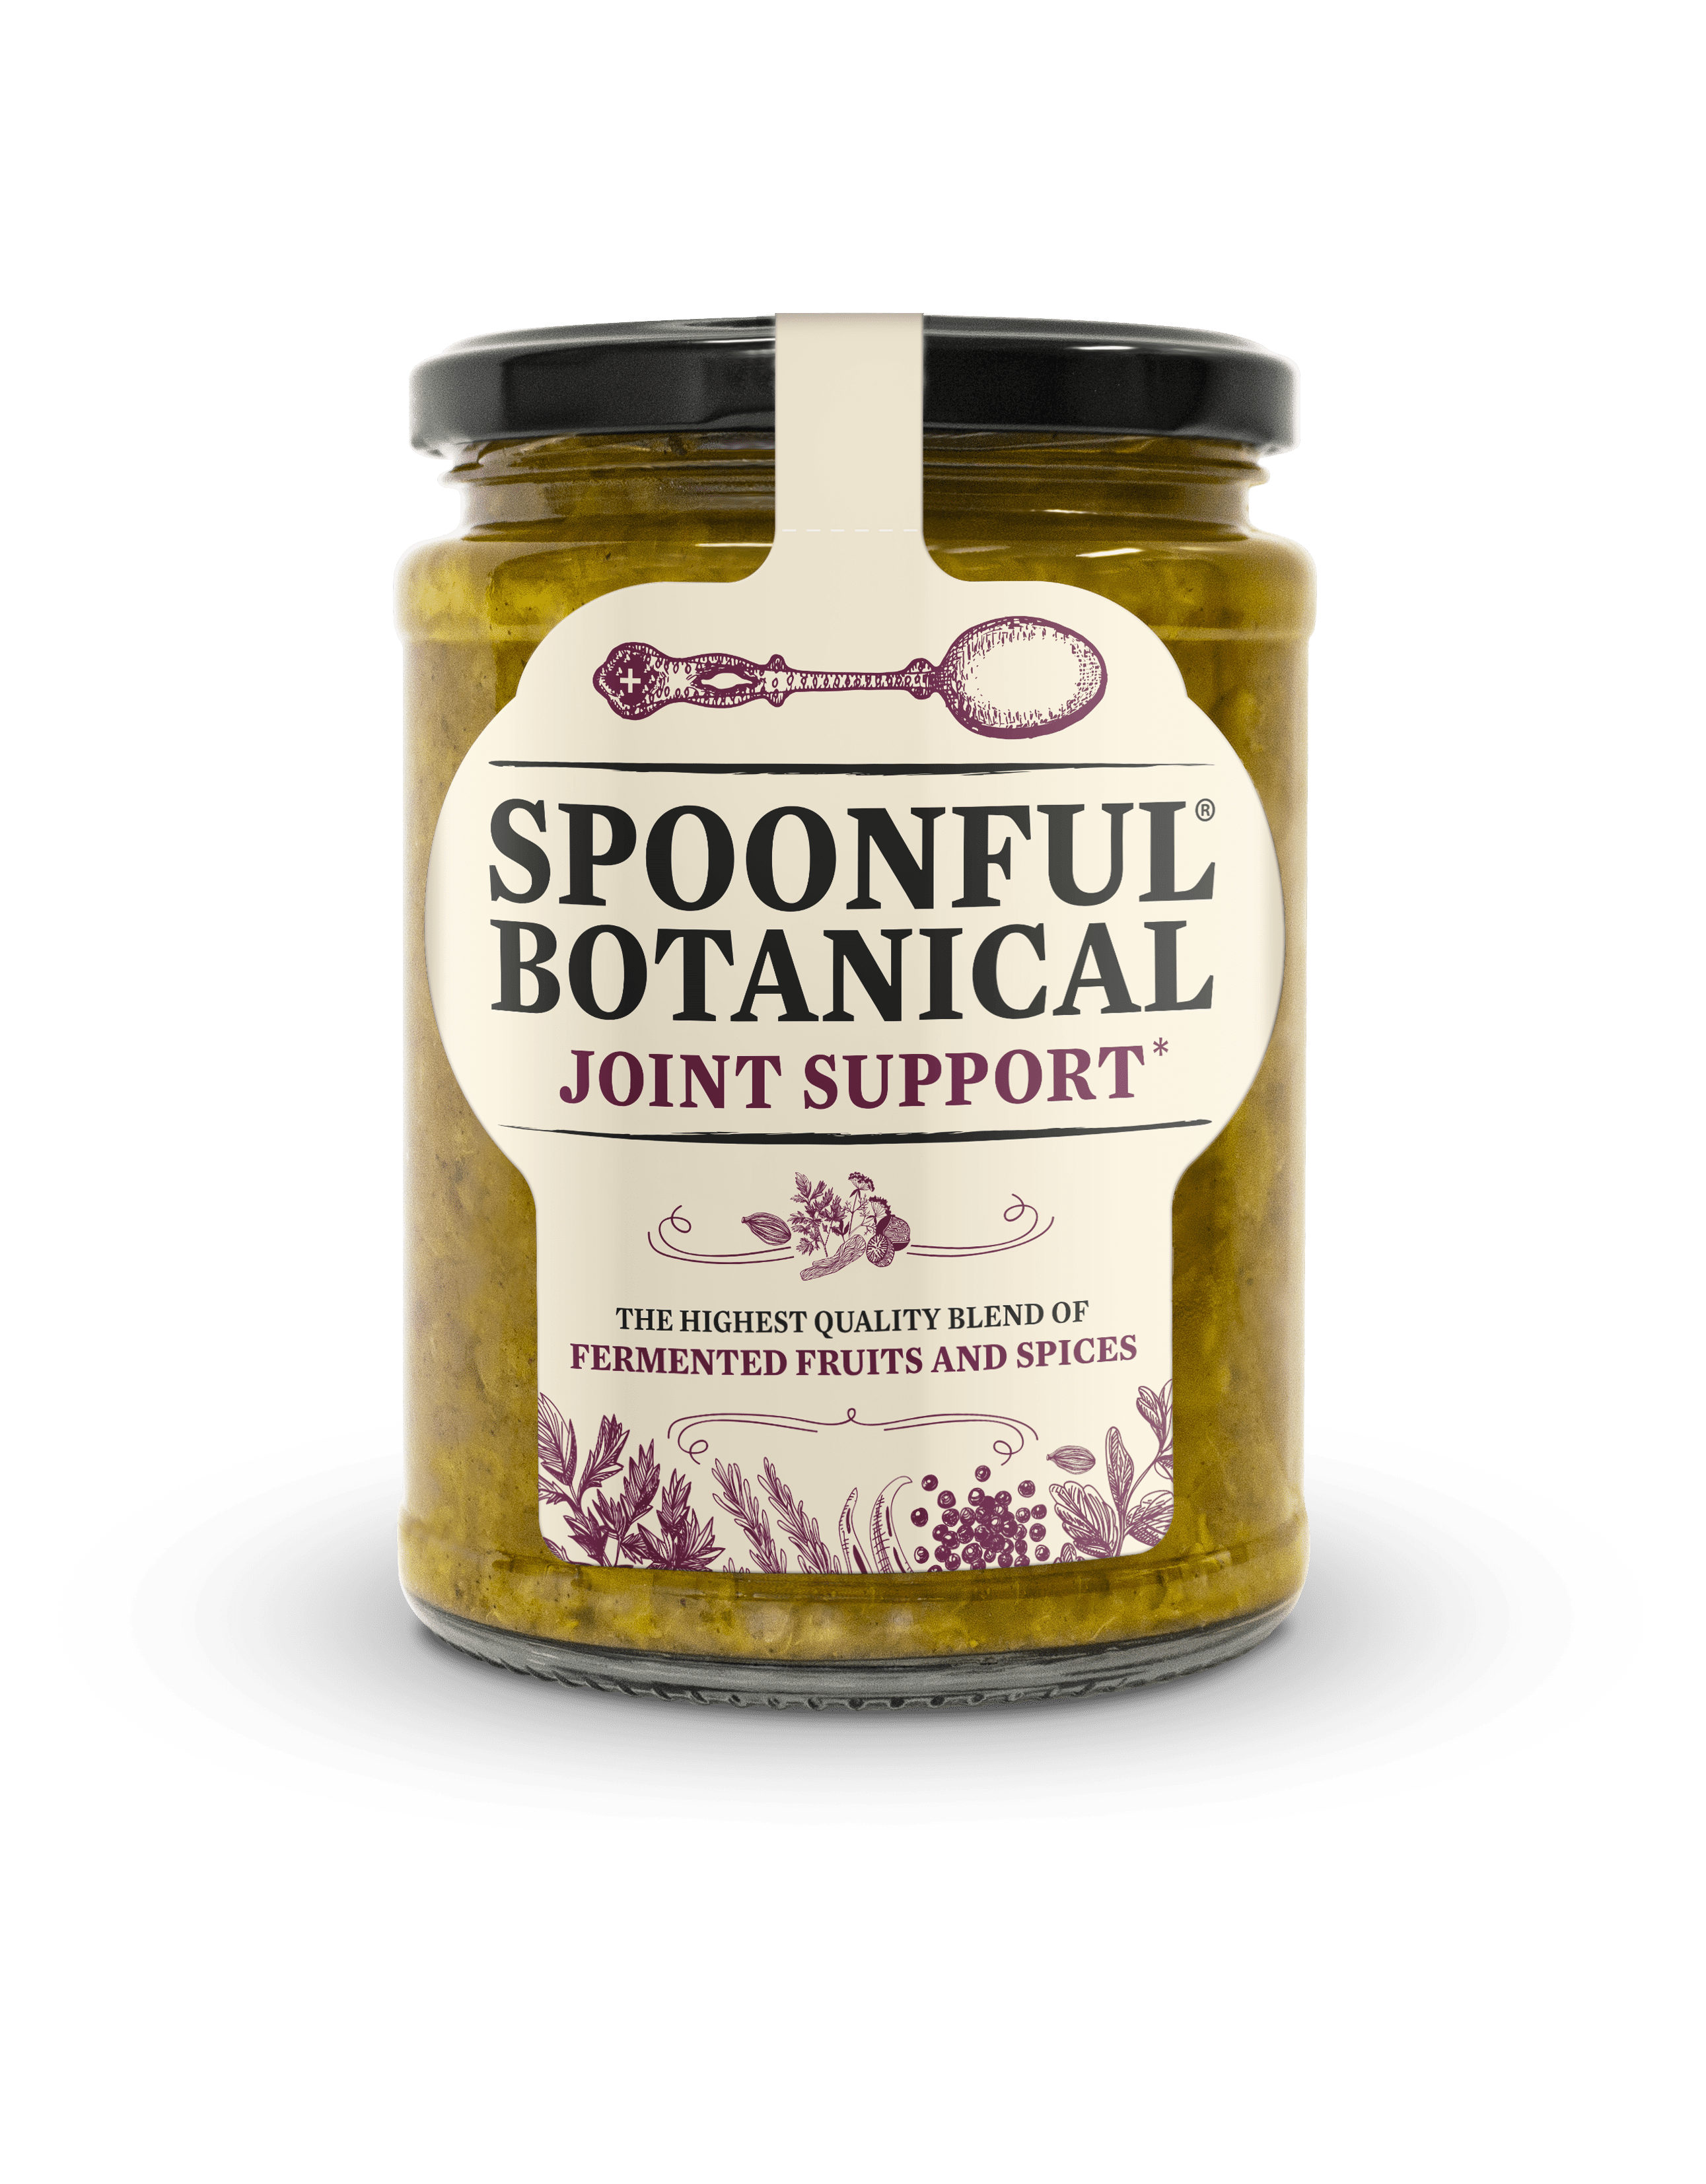 Spoonful Botanical Joint Support